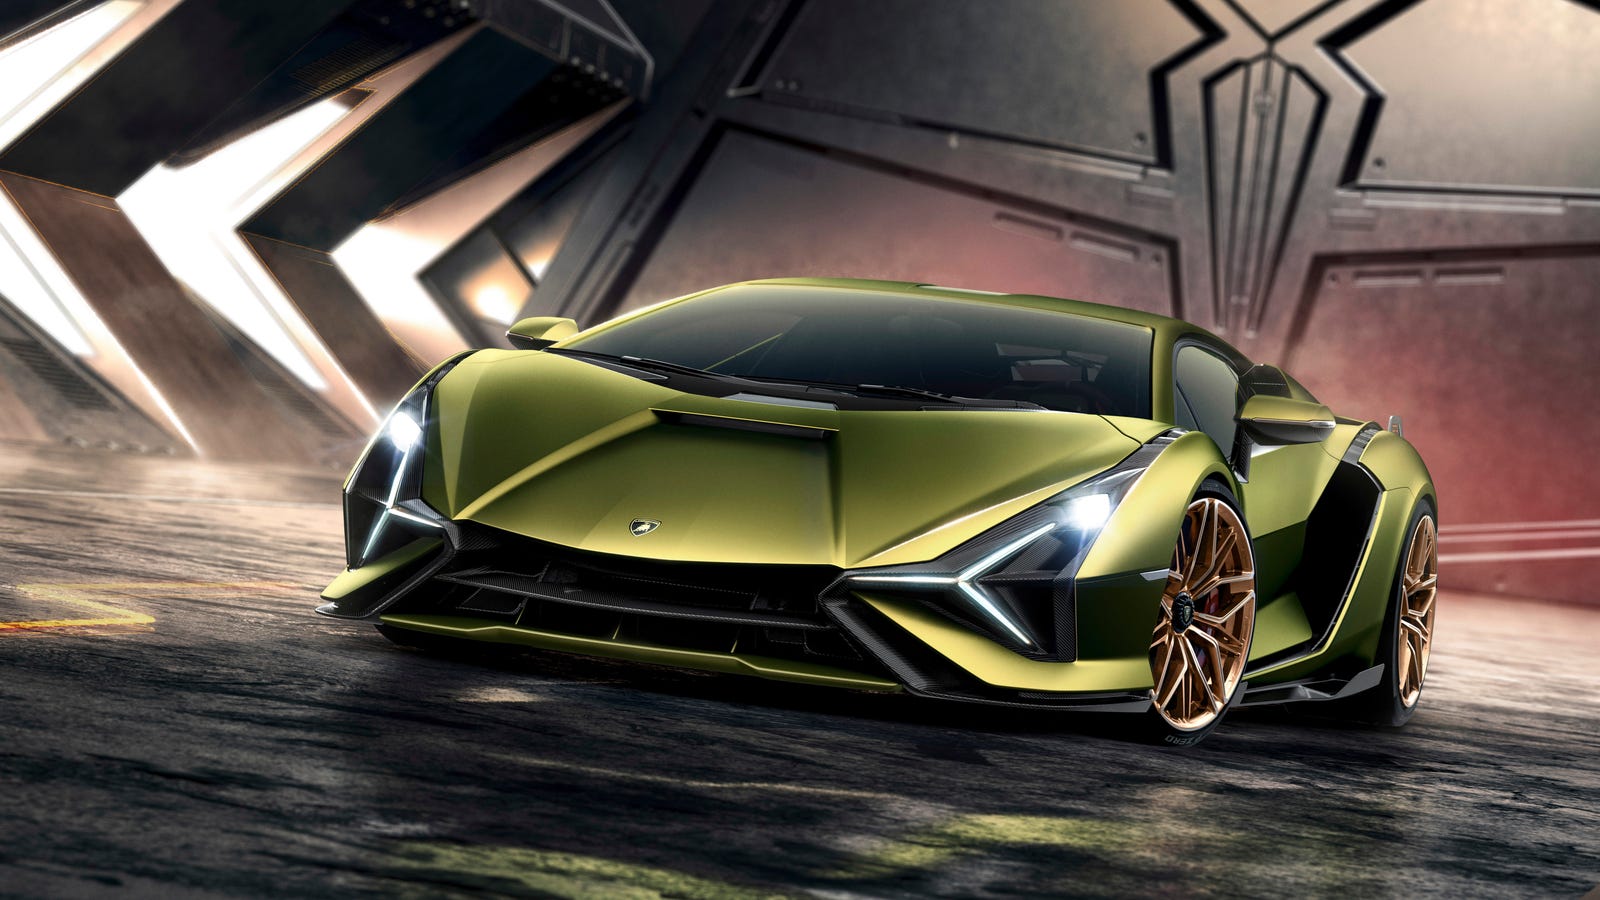 The 2020 Lamborghini Sián Is Here With 819 HP And A Hybrid V12